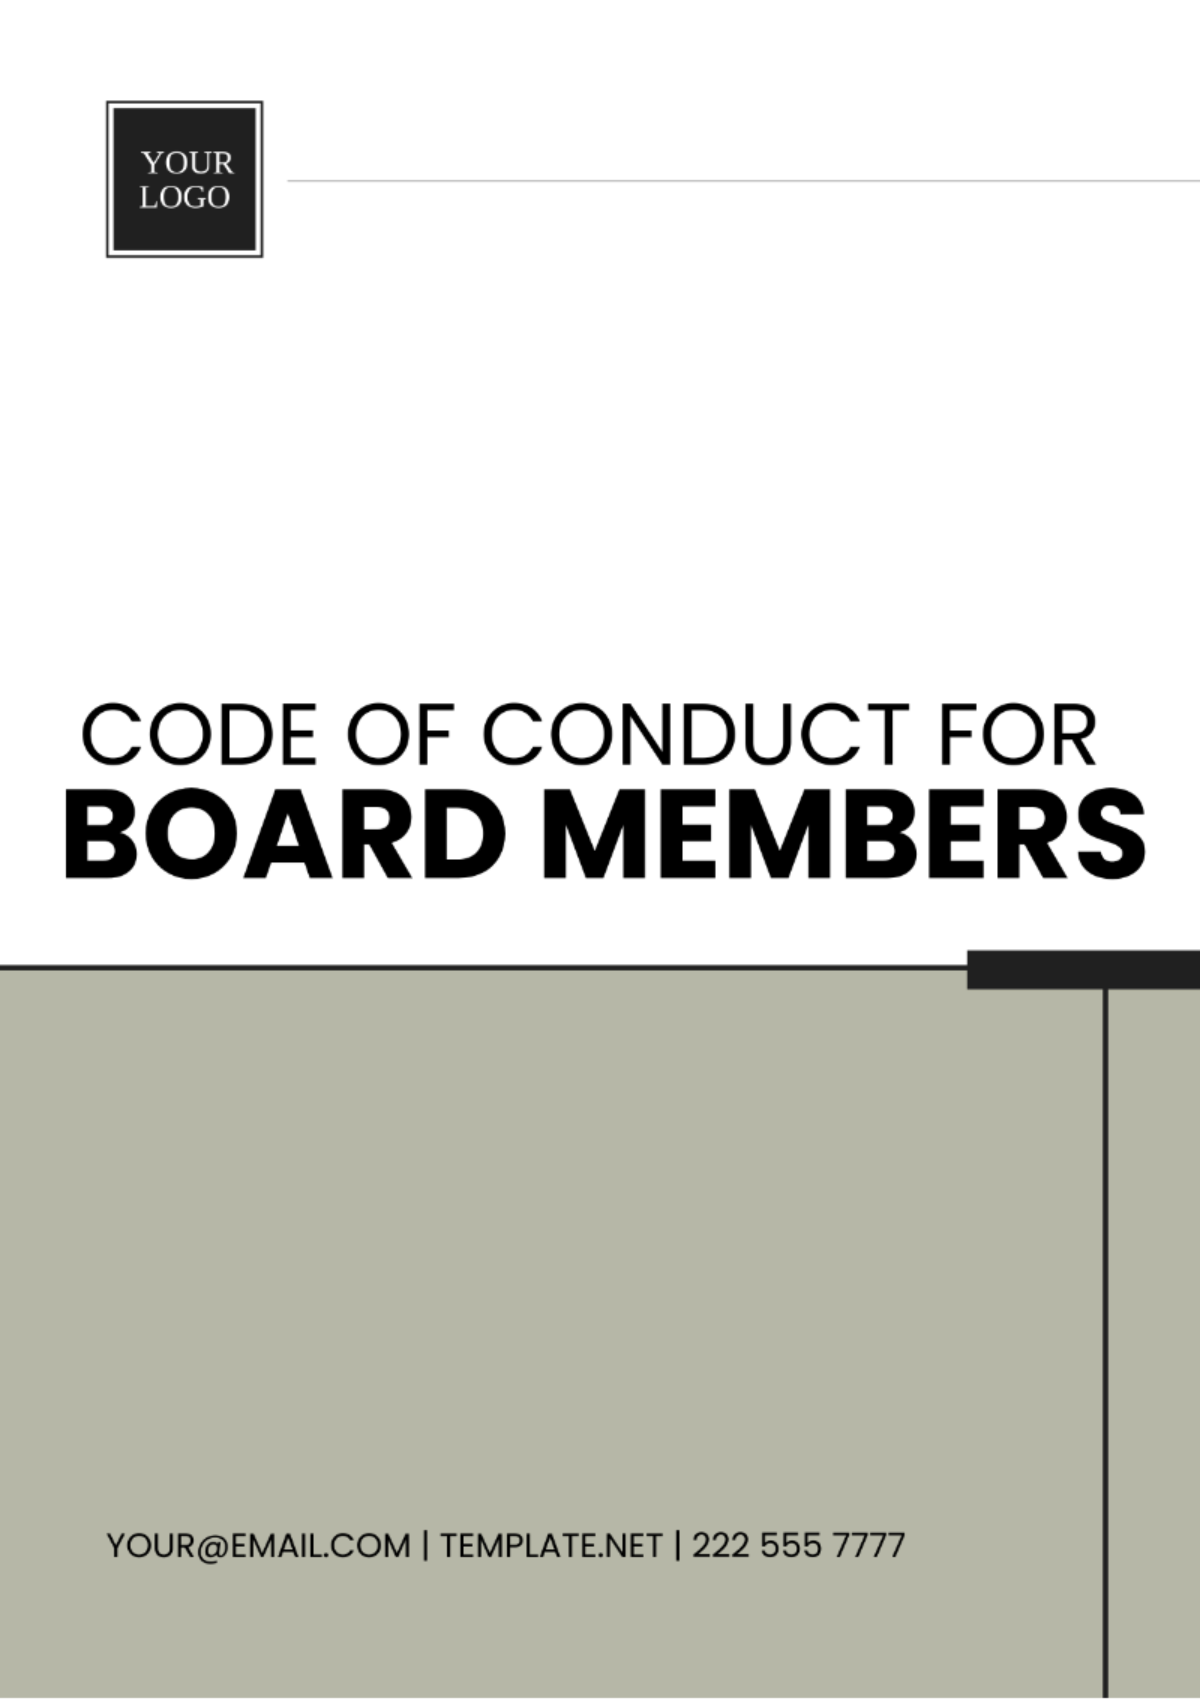 Code of Conduct for Board Members Template